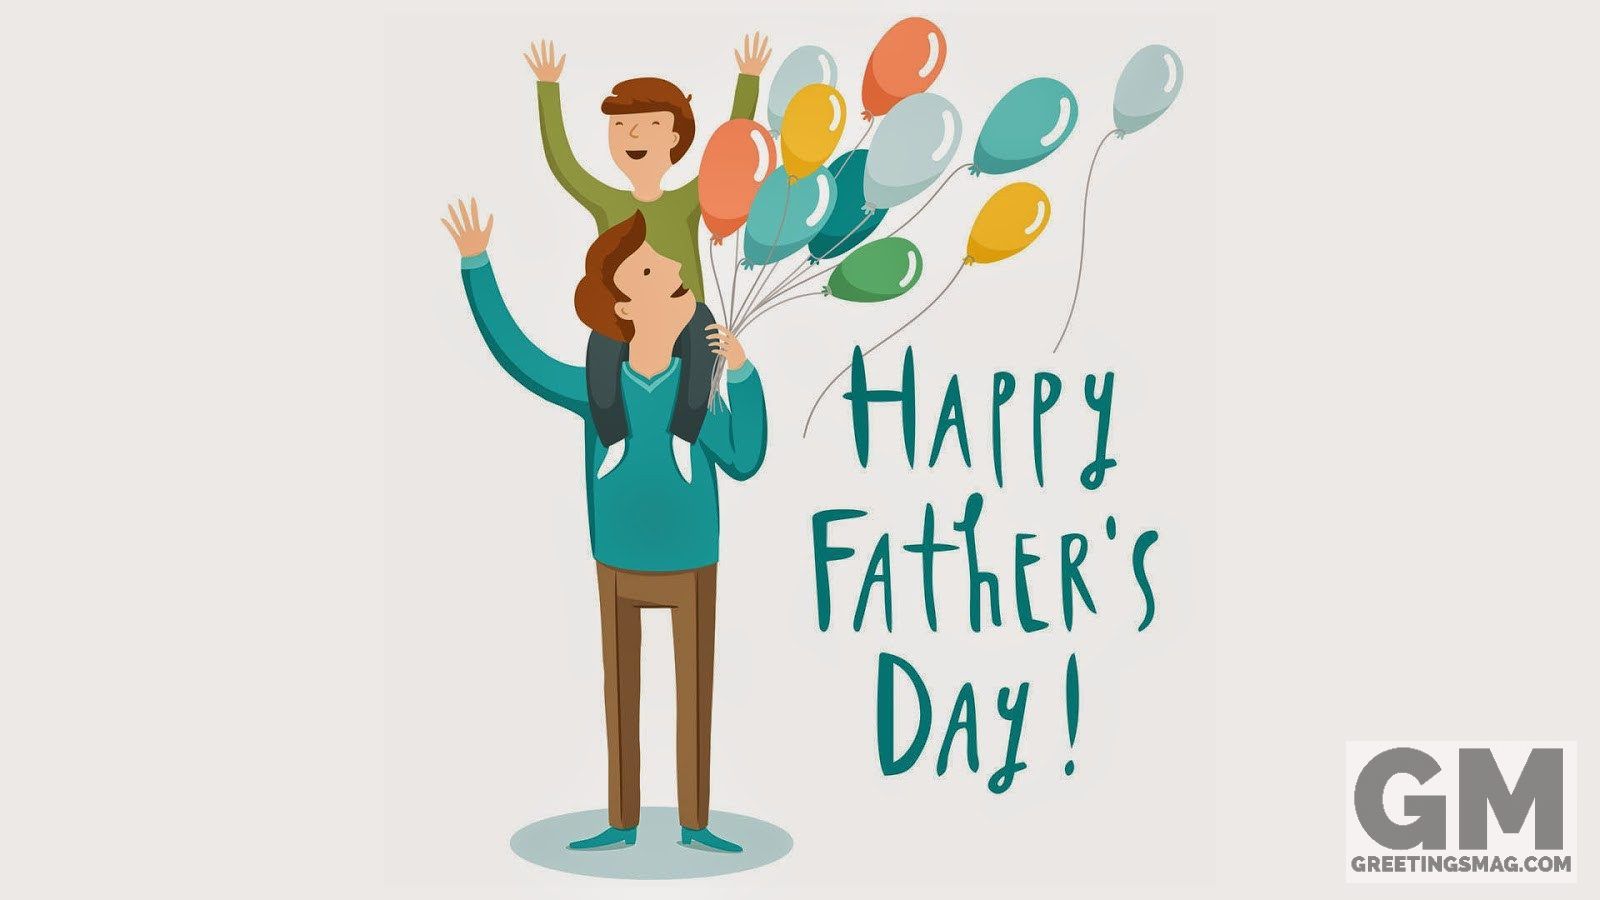 Happy Fathers Day 2020: Wishes, Greetings, Image, Quotes. Happy